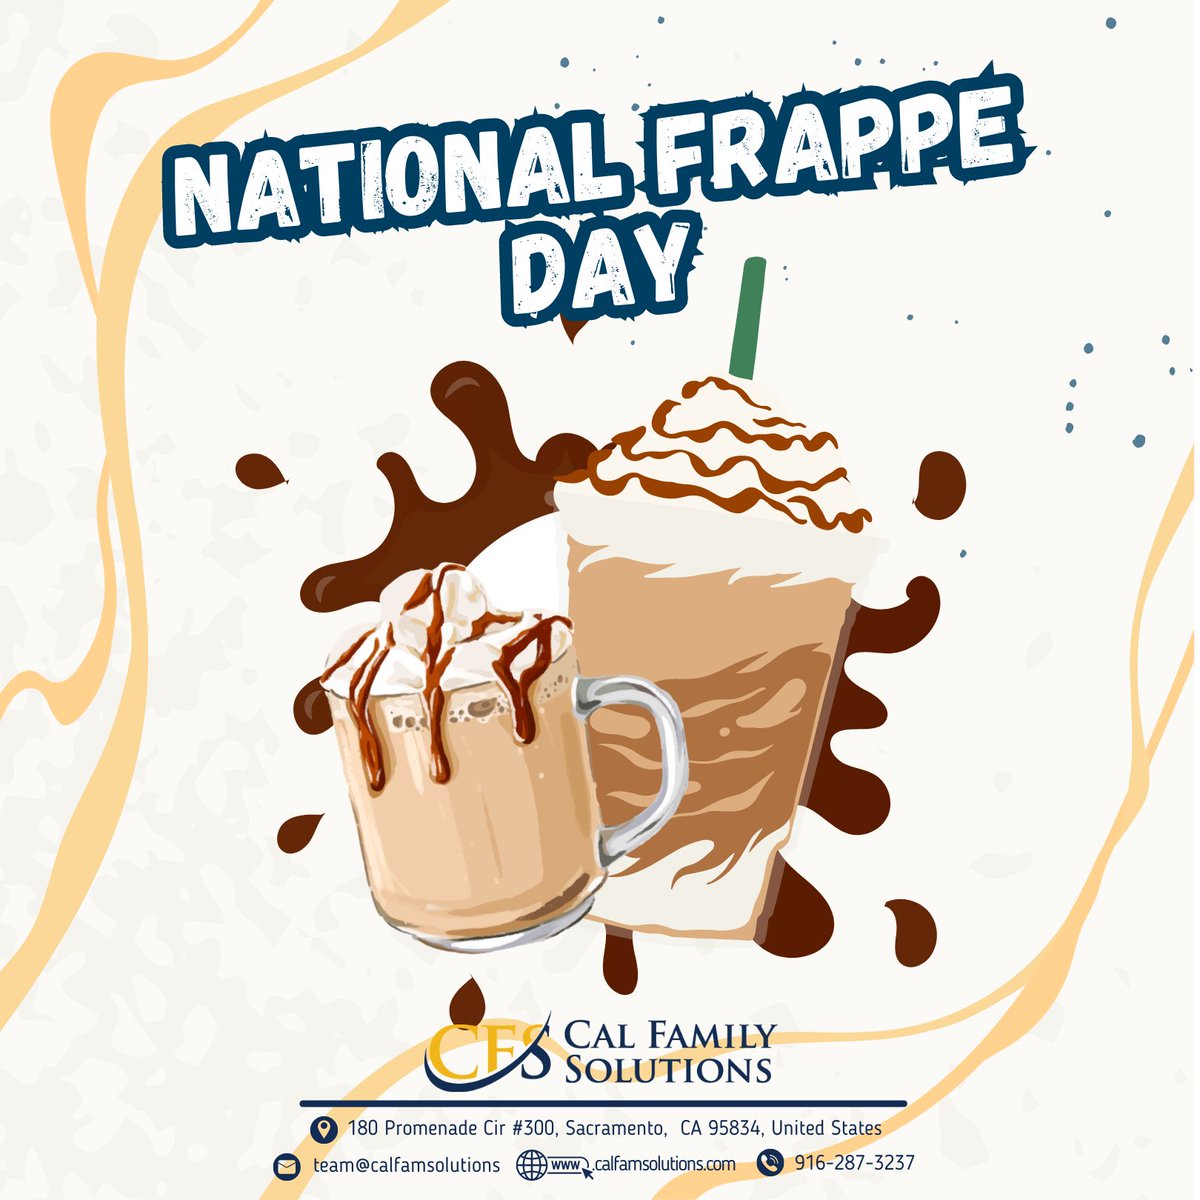 'Sip, savor, and celebrate the art of indulgence on National Frappe Day. Cheers to frothy delights!' 🥤🍨🍦🥶
#FrappeAddict #ChilledDelights #ThirstQuencher #Frappuccino #FrozenTreats #CaliforniaDivorce #DivorceLawyerCA #FamilyLawCA #DivorceProcess #DivorceHelpCA